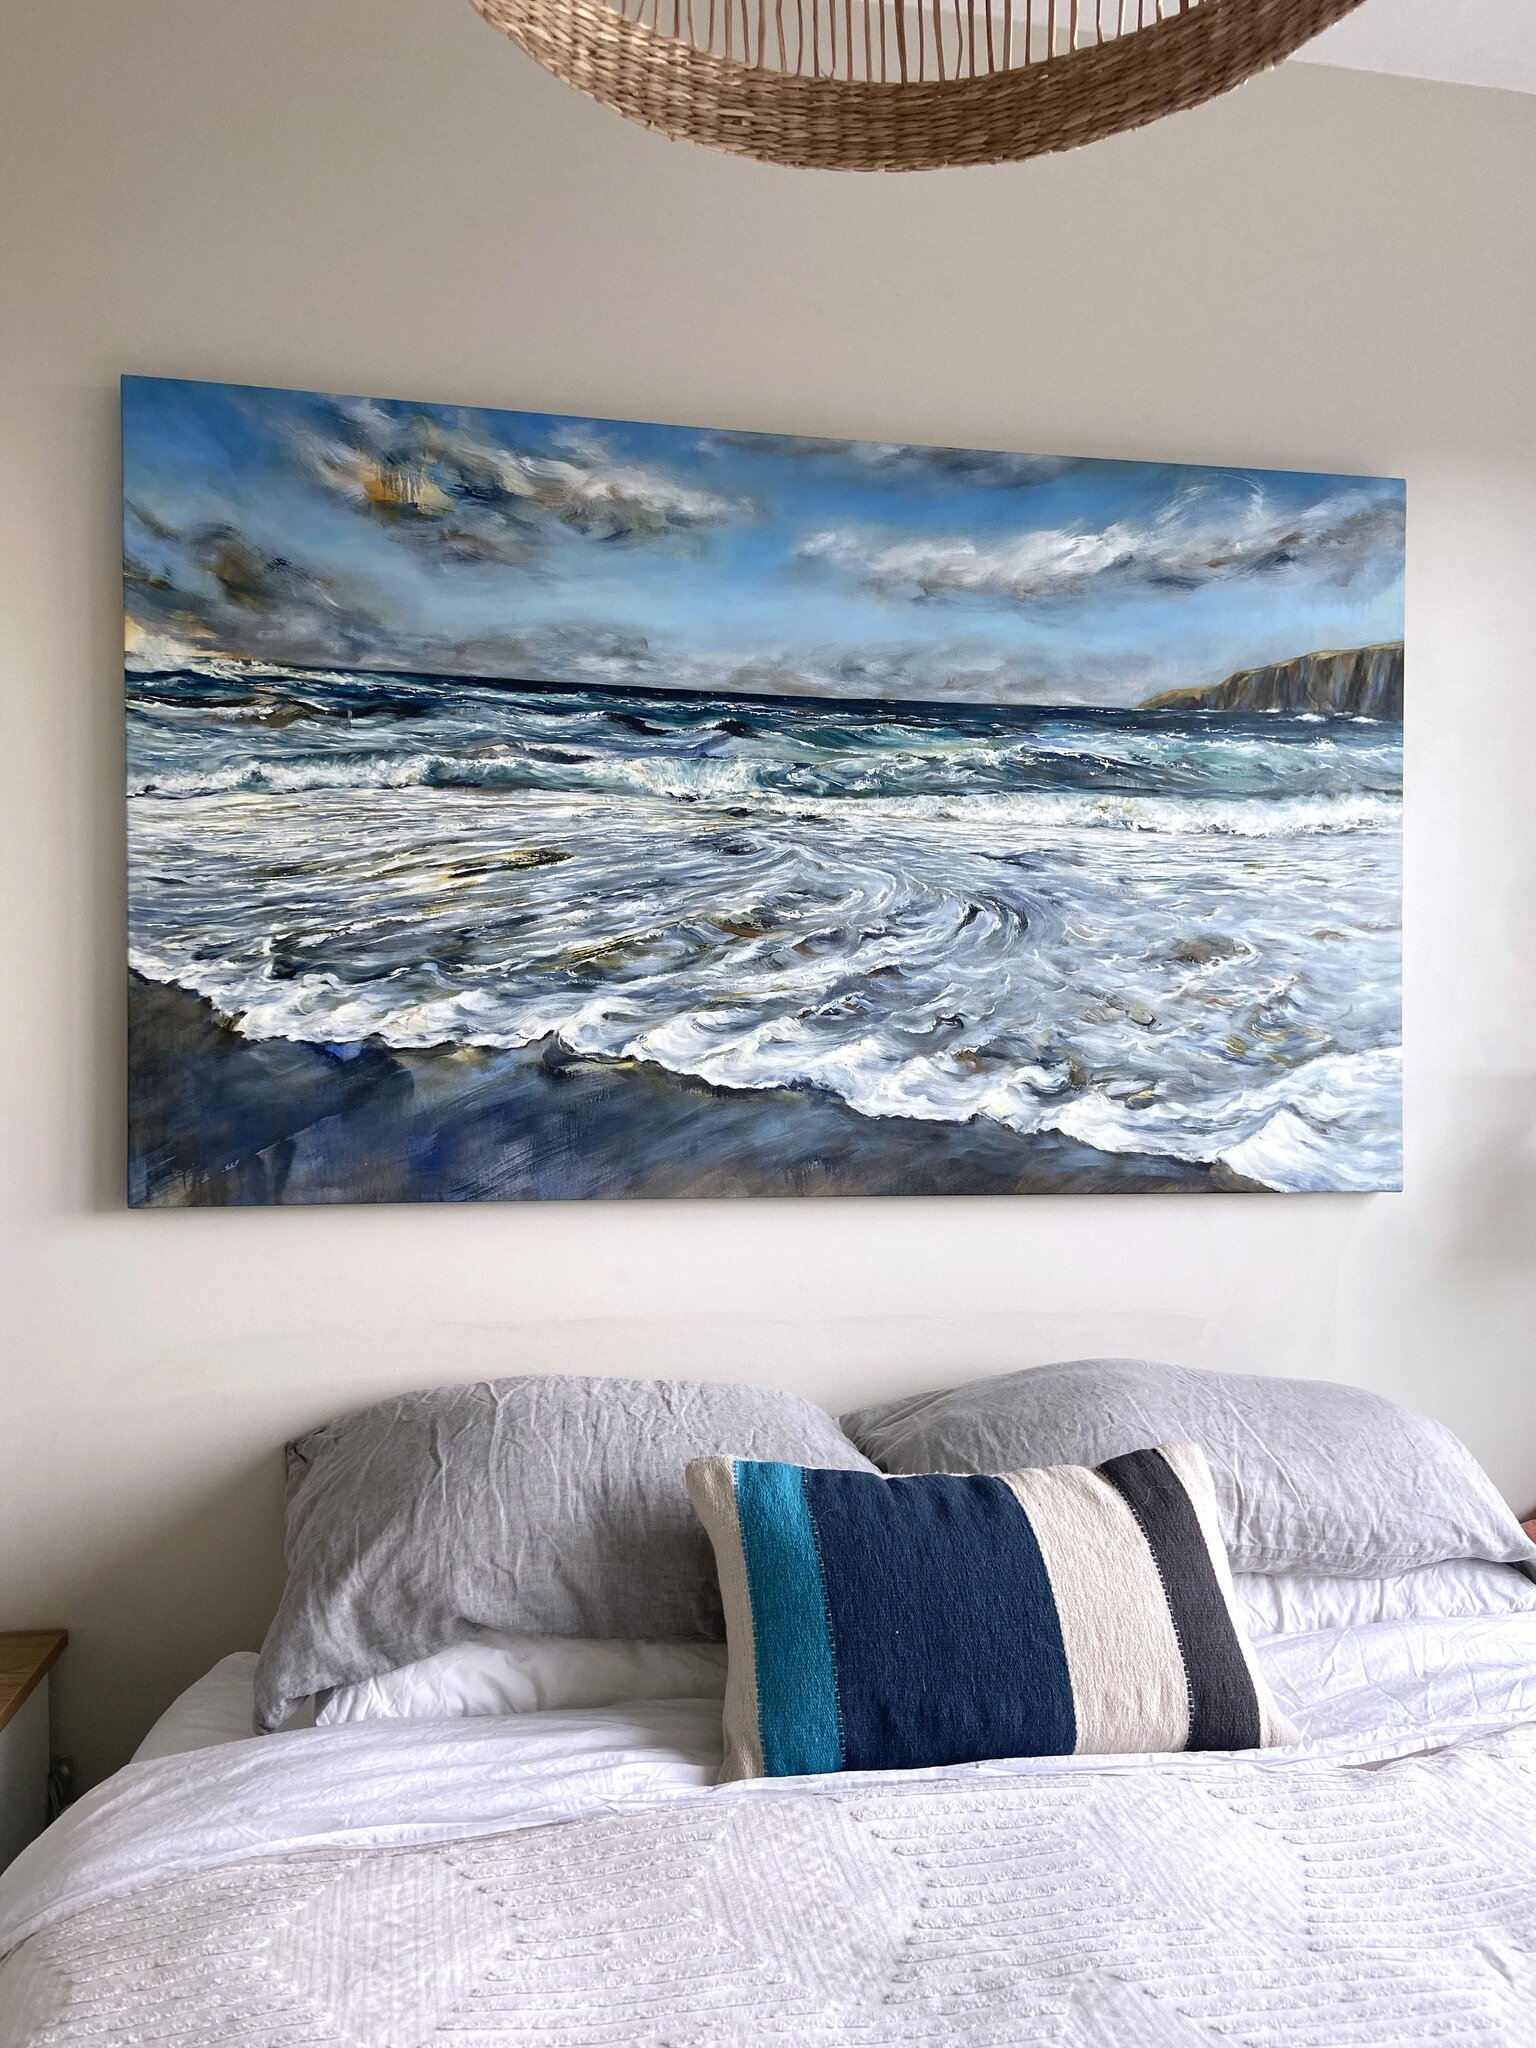 &quot;Emerald Sea&quot; shining brightly on a bedroom wall💙✨ I had several breakthroughs while painting this piece, one being learning how to capture the wild sea froth as it raced up the shore and curled back to return to the ocean. 

Observing the